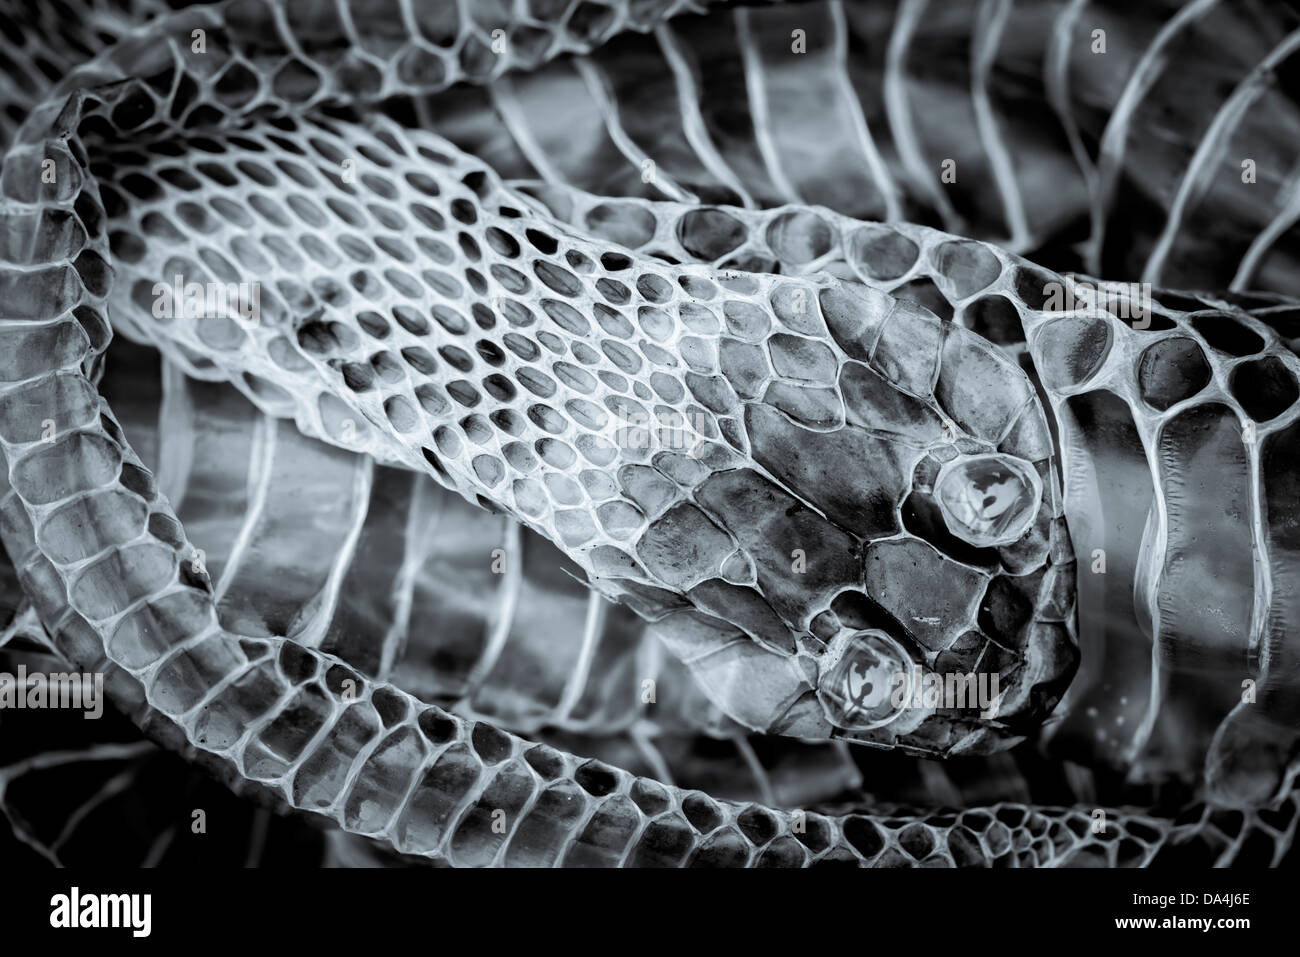 Shed or moulted skin of a grass snake Stock Photo